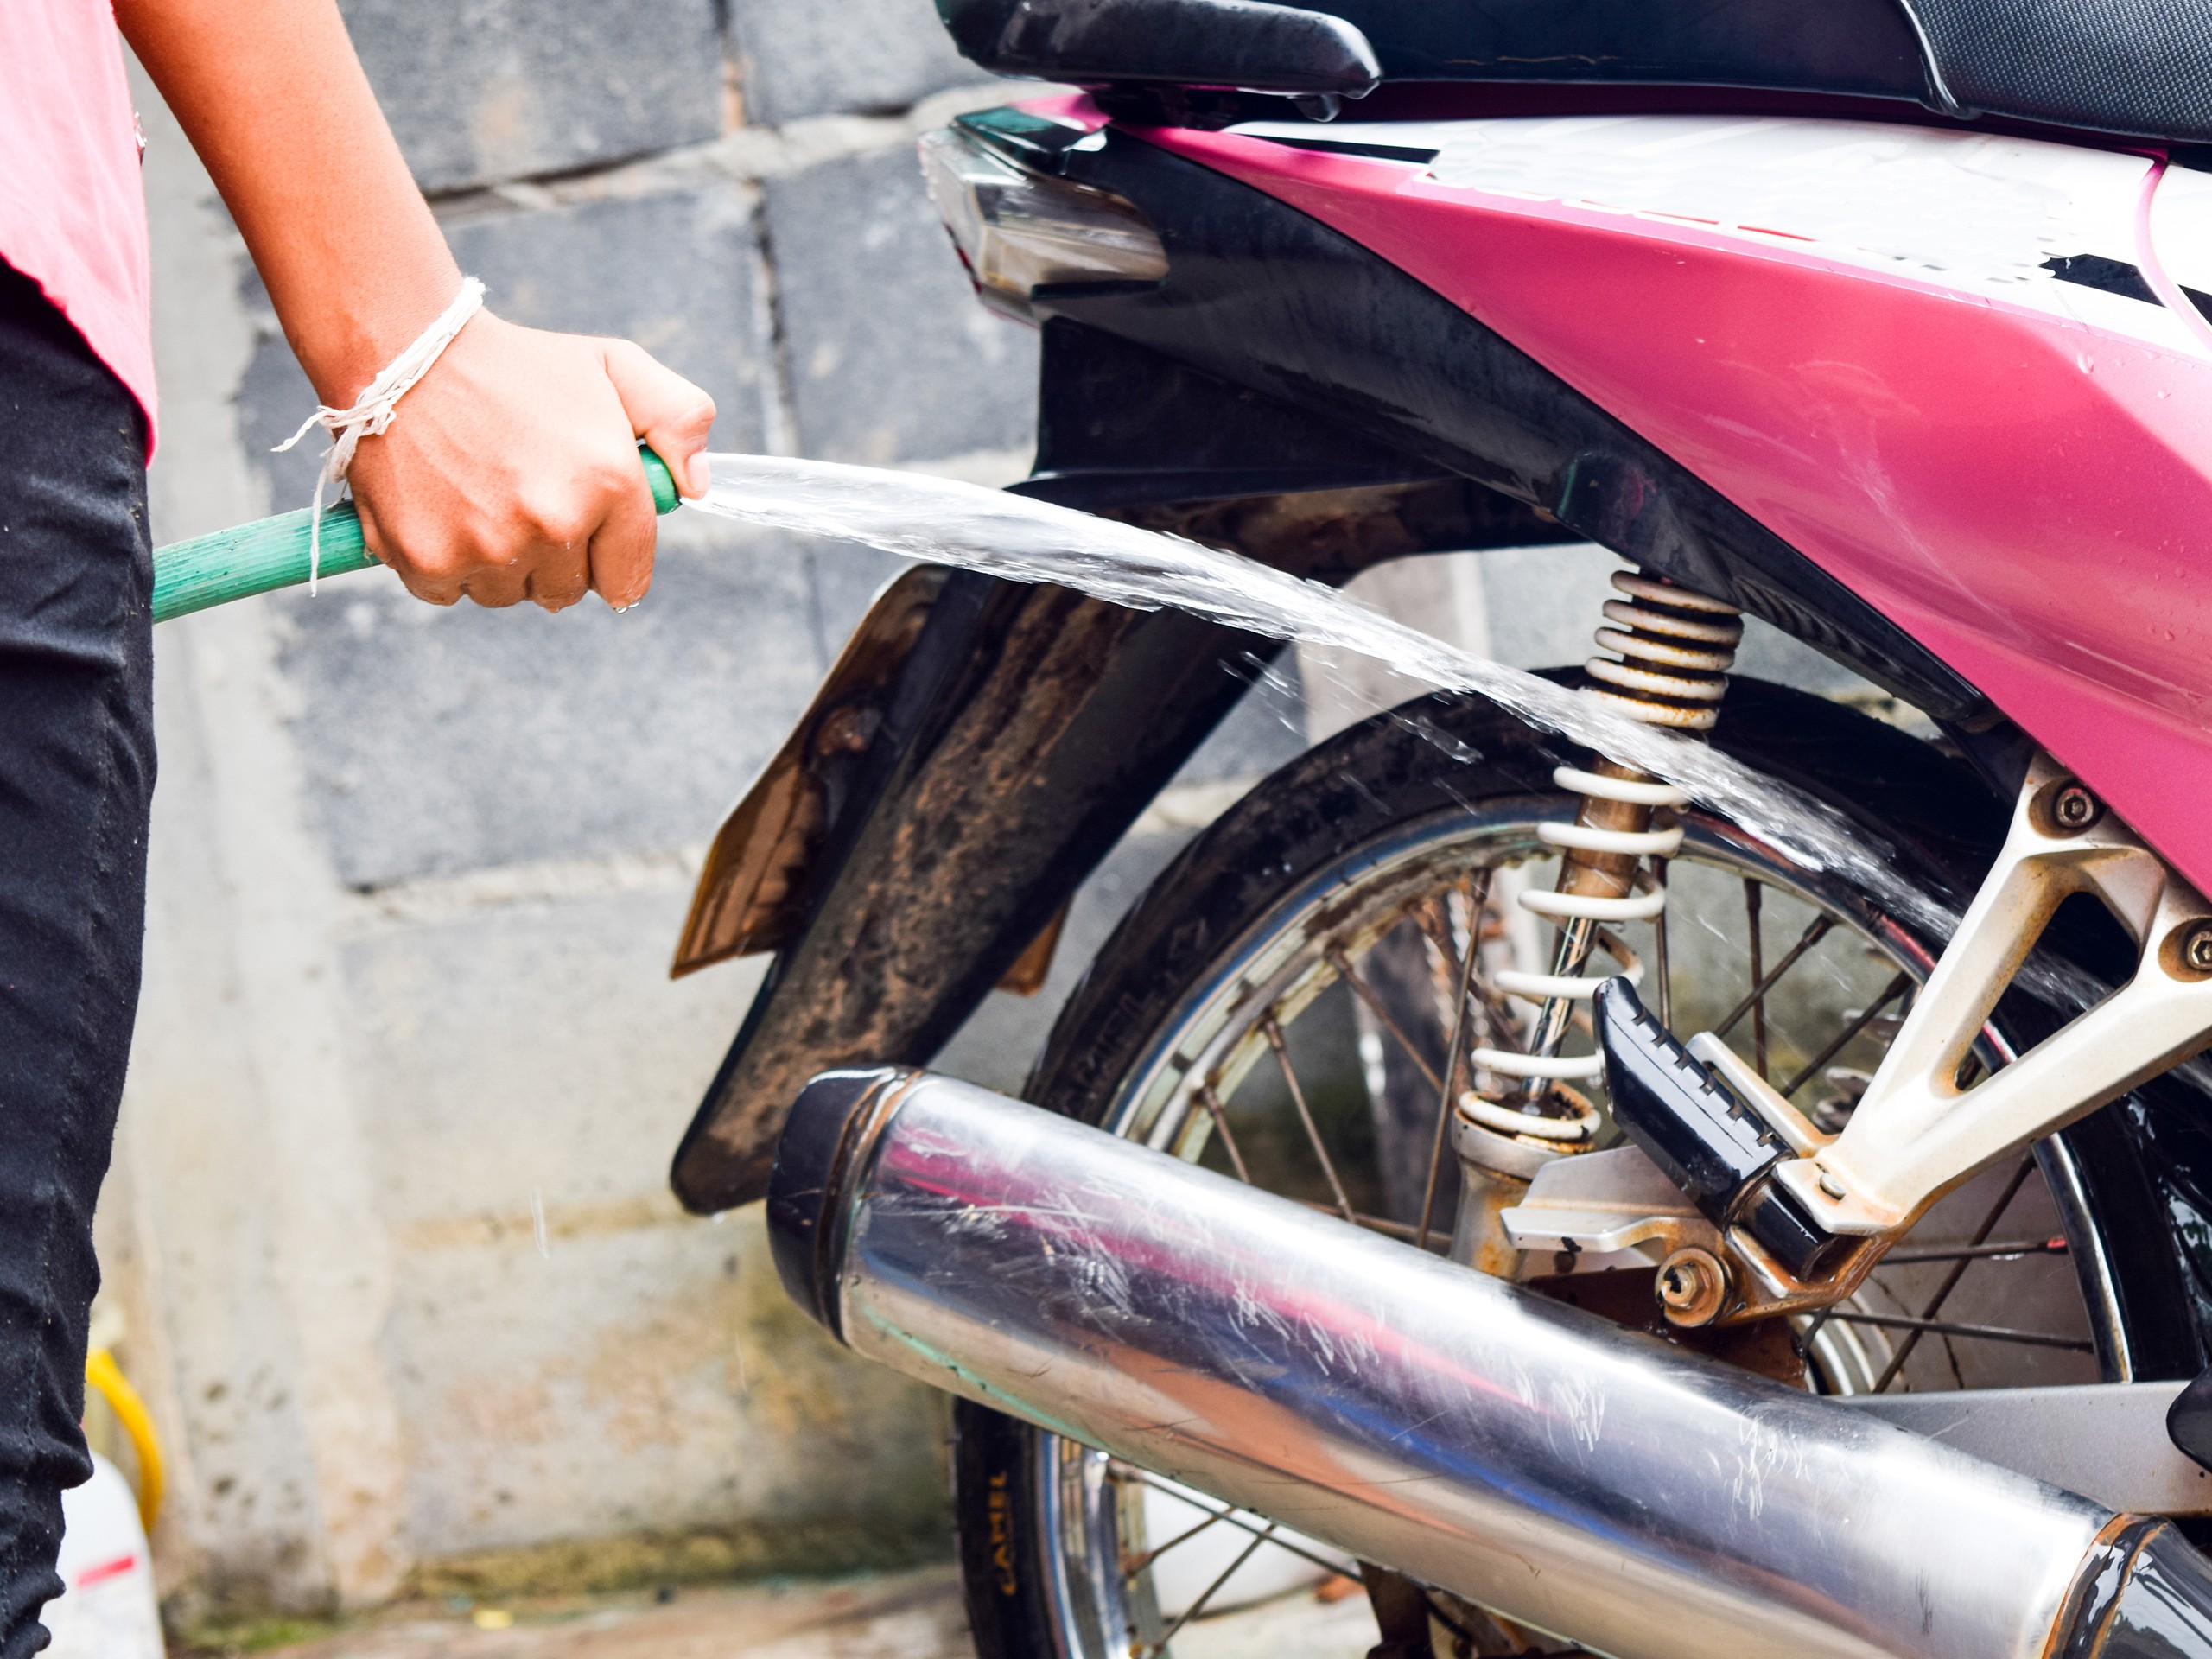 How to Clean a Motorcycle - How to Clean Things